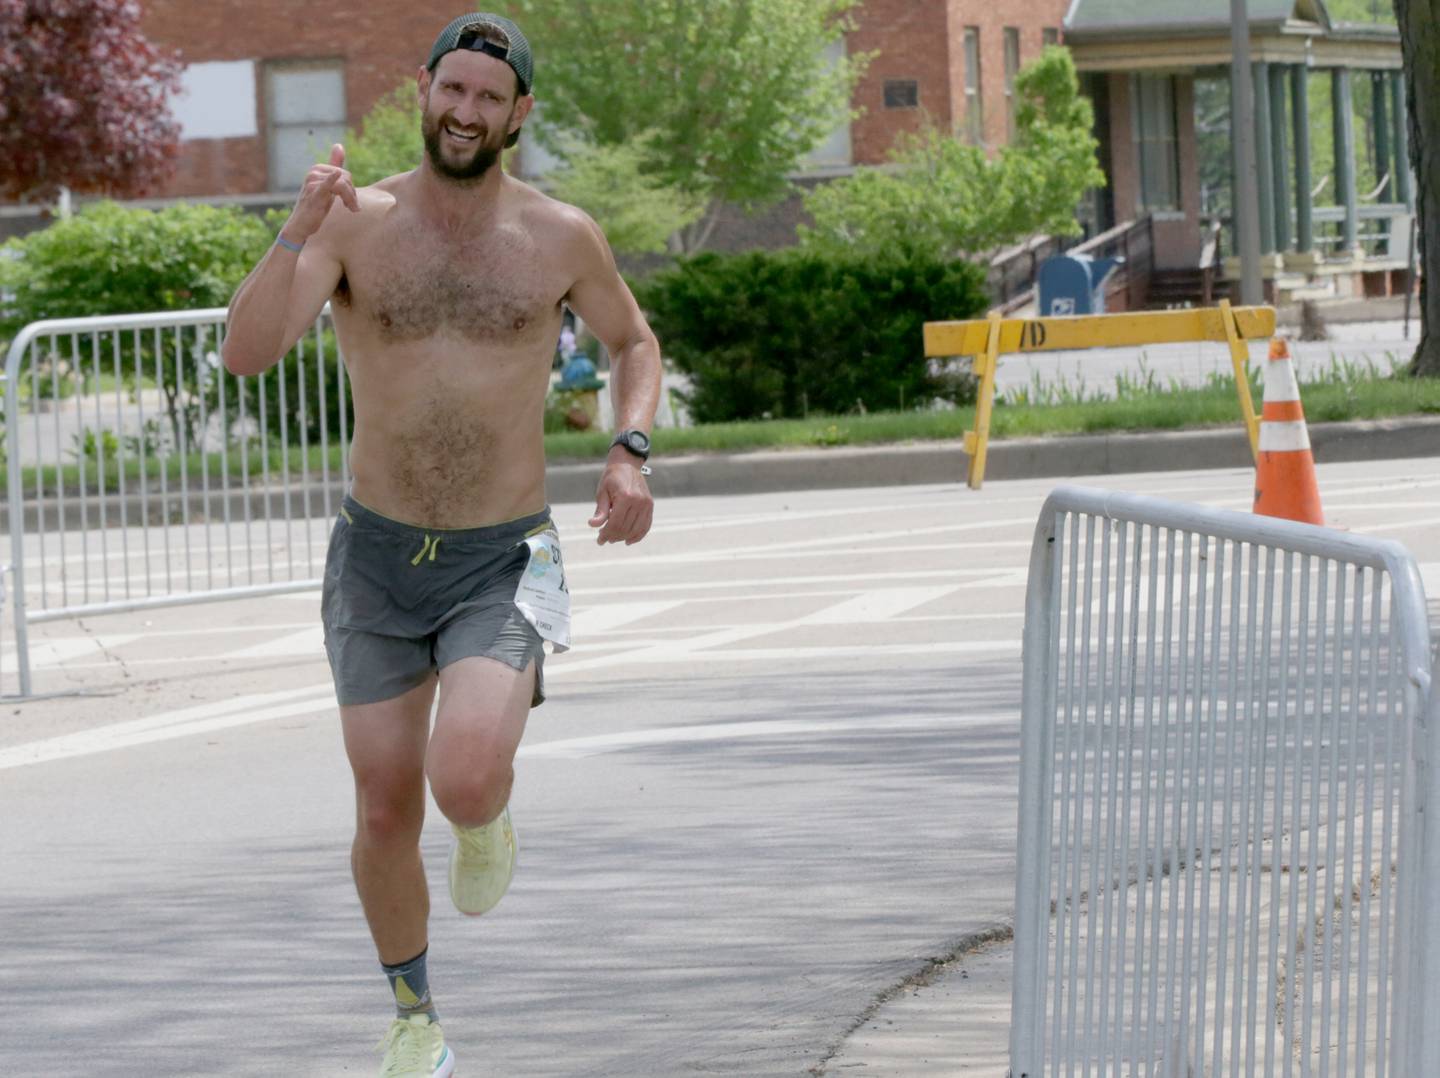 Stephen Holcomb, of the Streator, spins the final turn before reaching the finish line during the Starved Rock Marathon and Half Marathon on Saturday, May 14, 2022 in Ottawa.